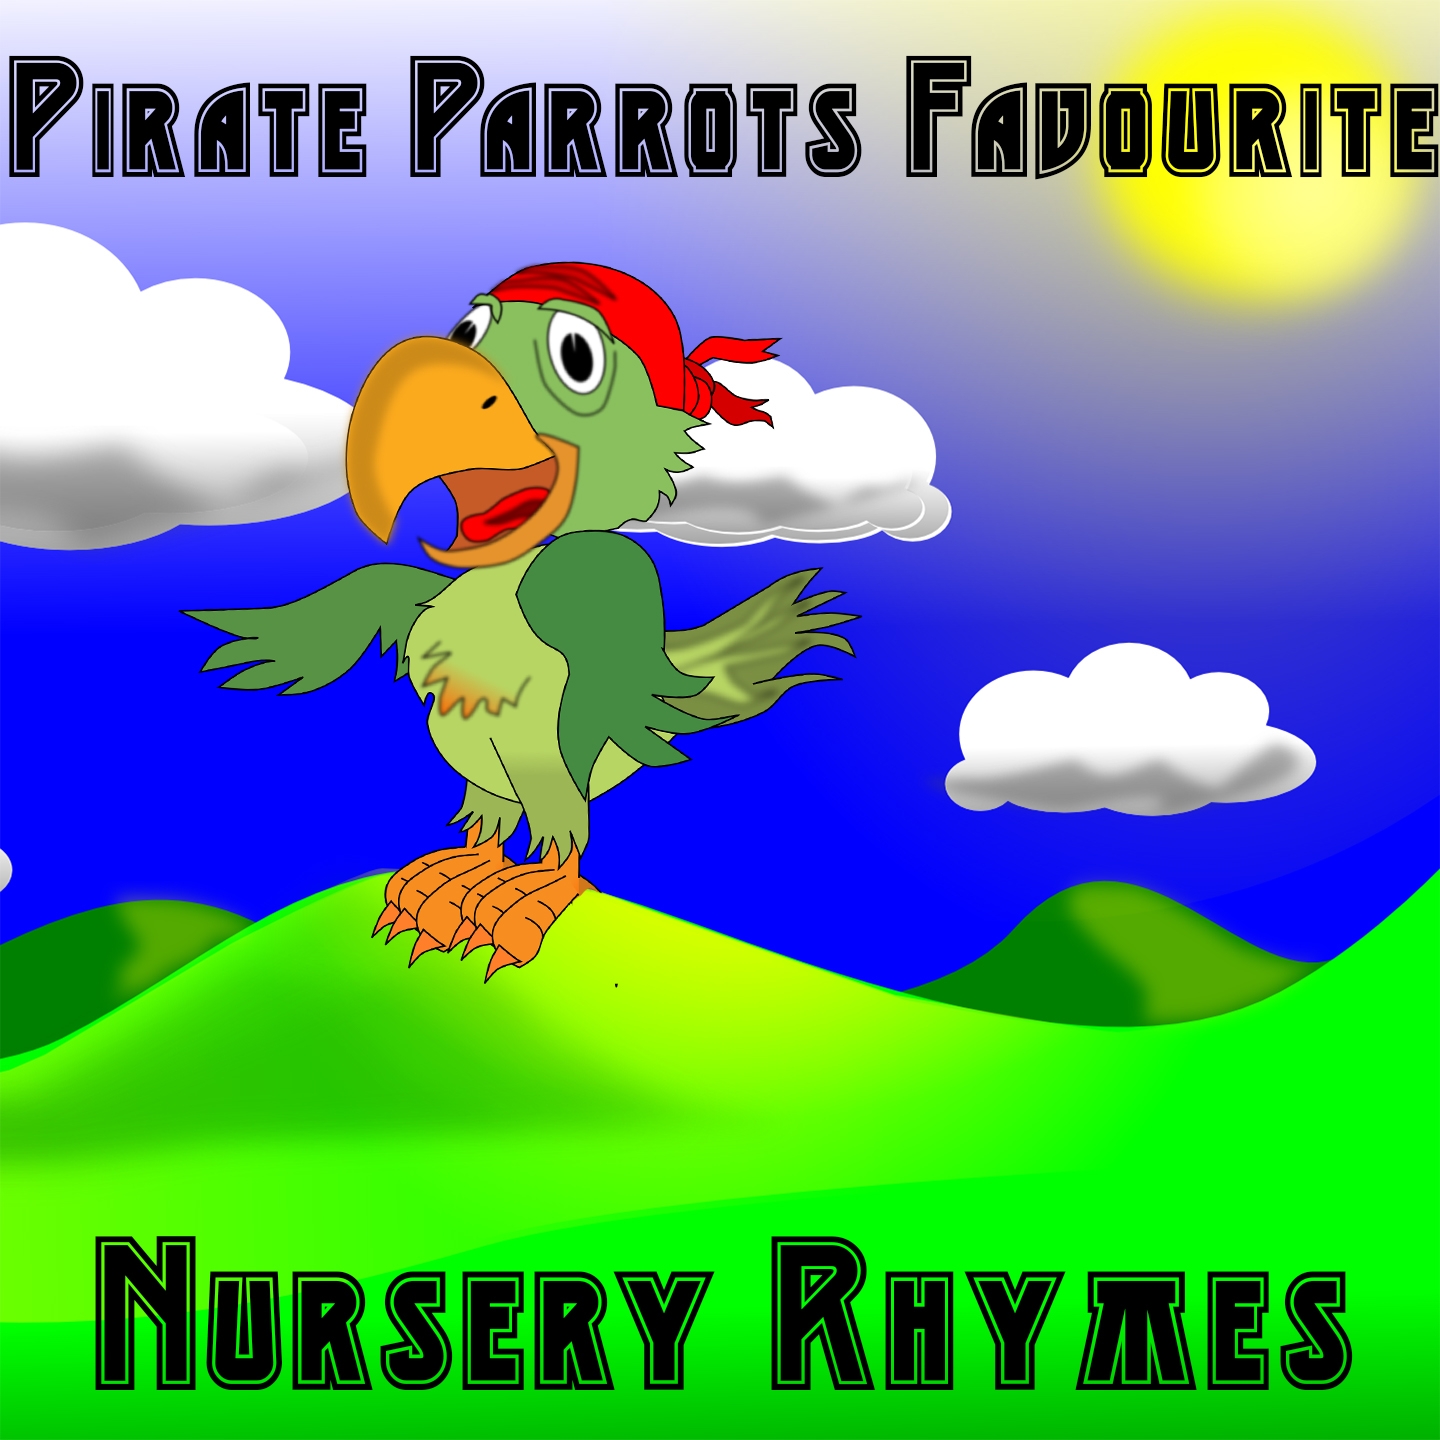 Pirate Parrots Favourite Nursery Rhymes